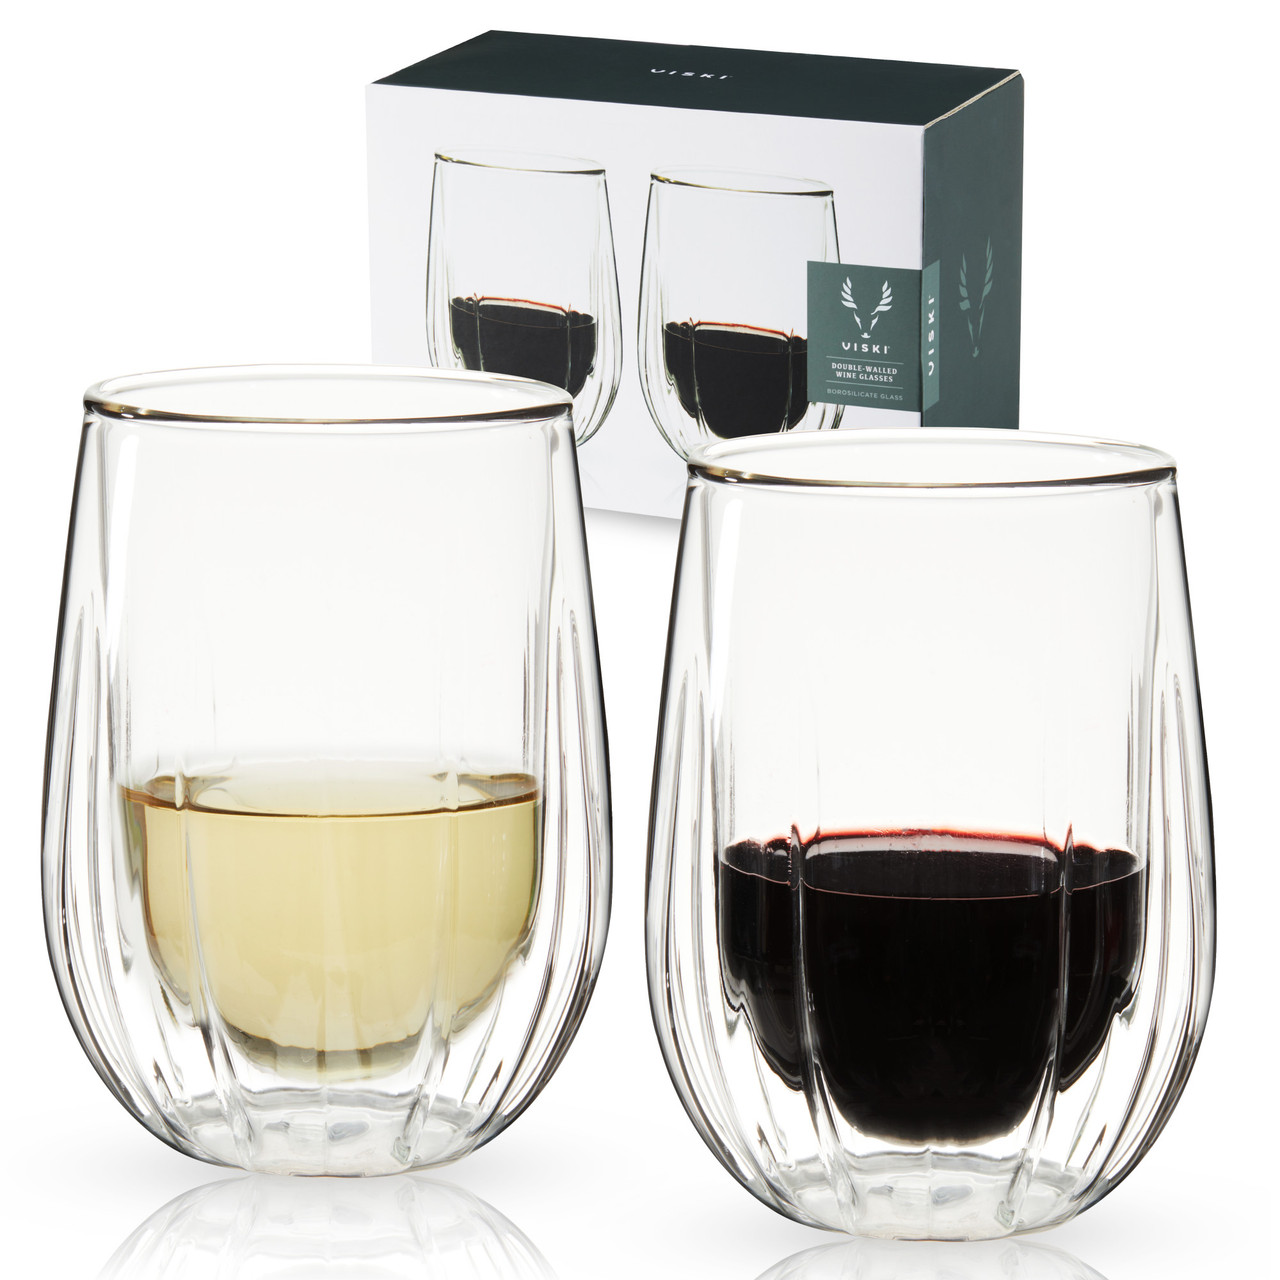 https://cdn11.bigcommerce.com/s-oo0gdojvjo/images/stencil/1280x1280/products/68832/100974/double-walled-stemless-wine-glasses-by-viski-set-of-2__79102.1683777570.jpg?c=2&imbypass=on